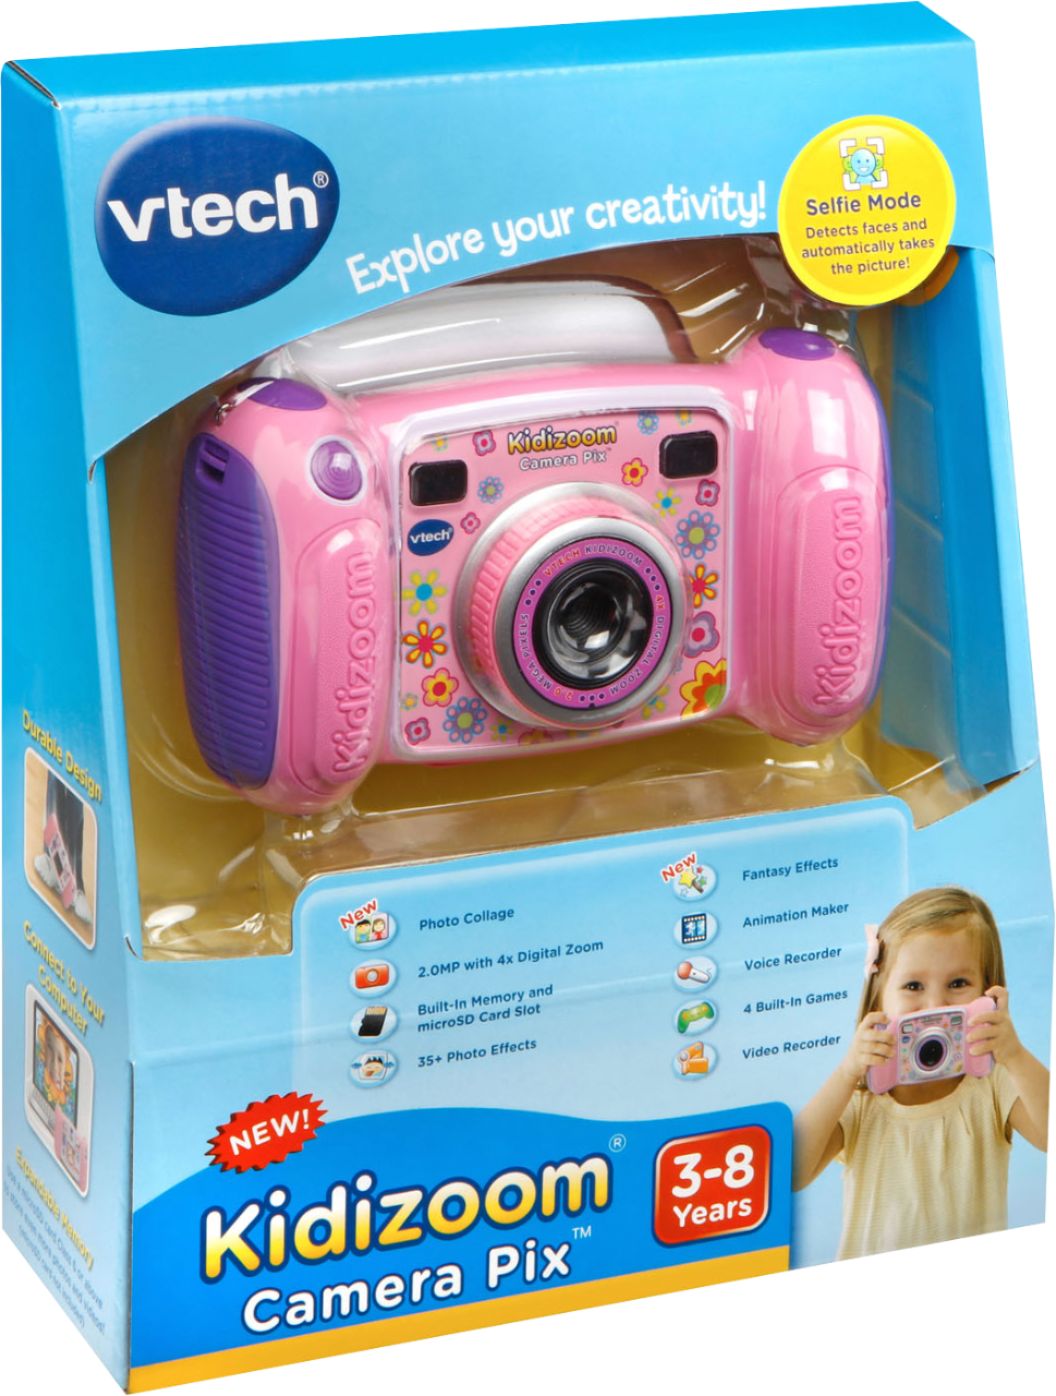 VTech Kidizoom Camera Pix Video Recorder Children Kids Toy Pink Real Pictures 